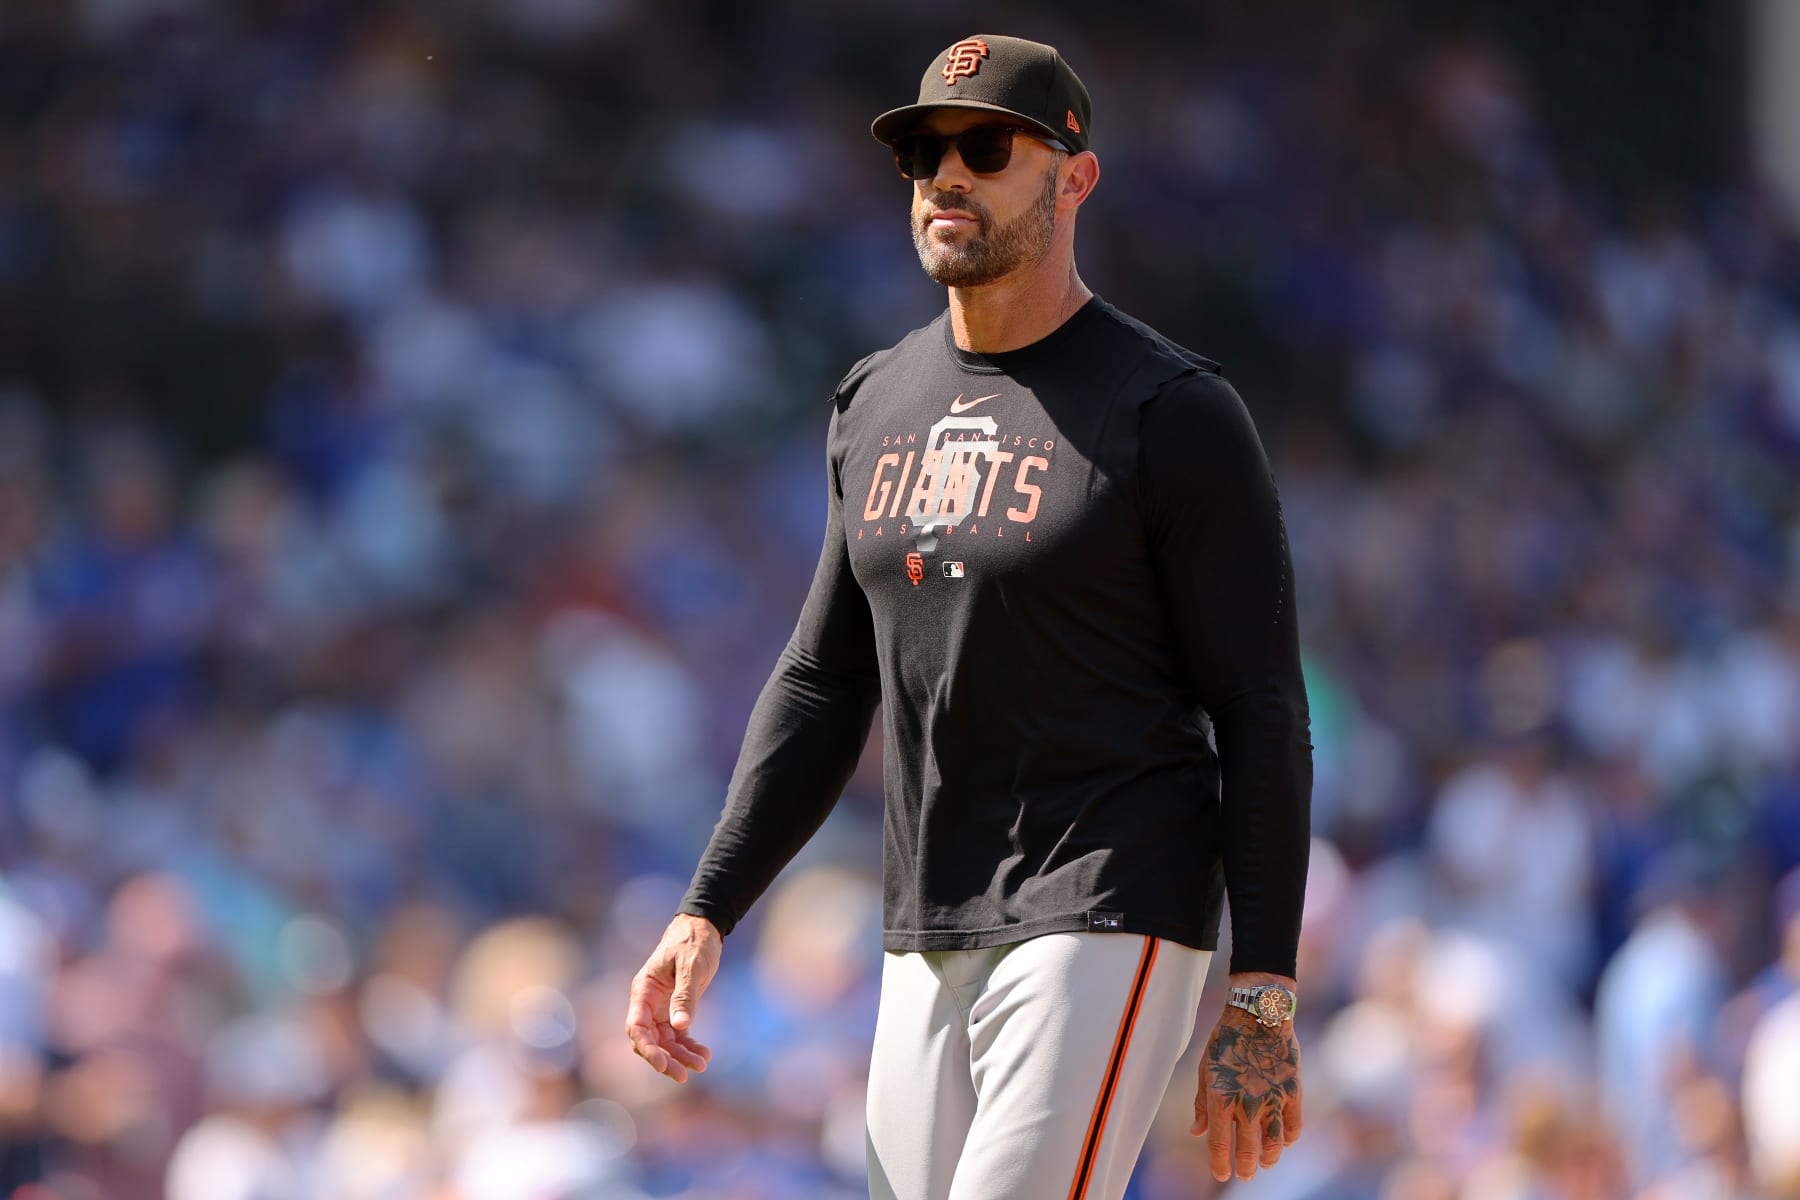 Giants hire Gabe Kapler as manager to replace Bruce Bochy